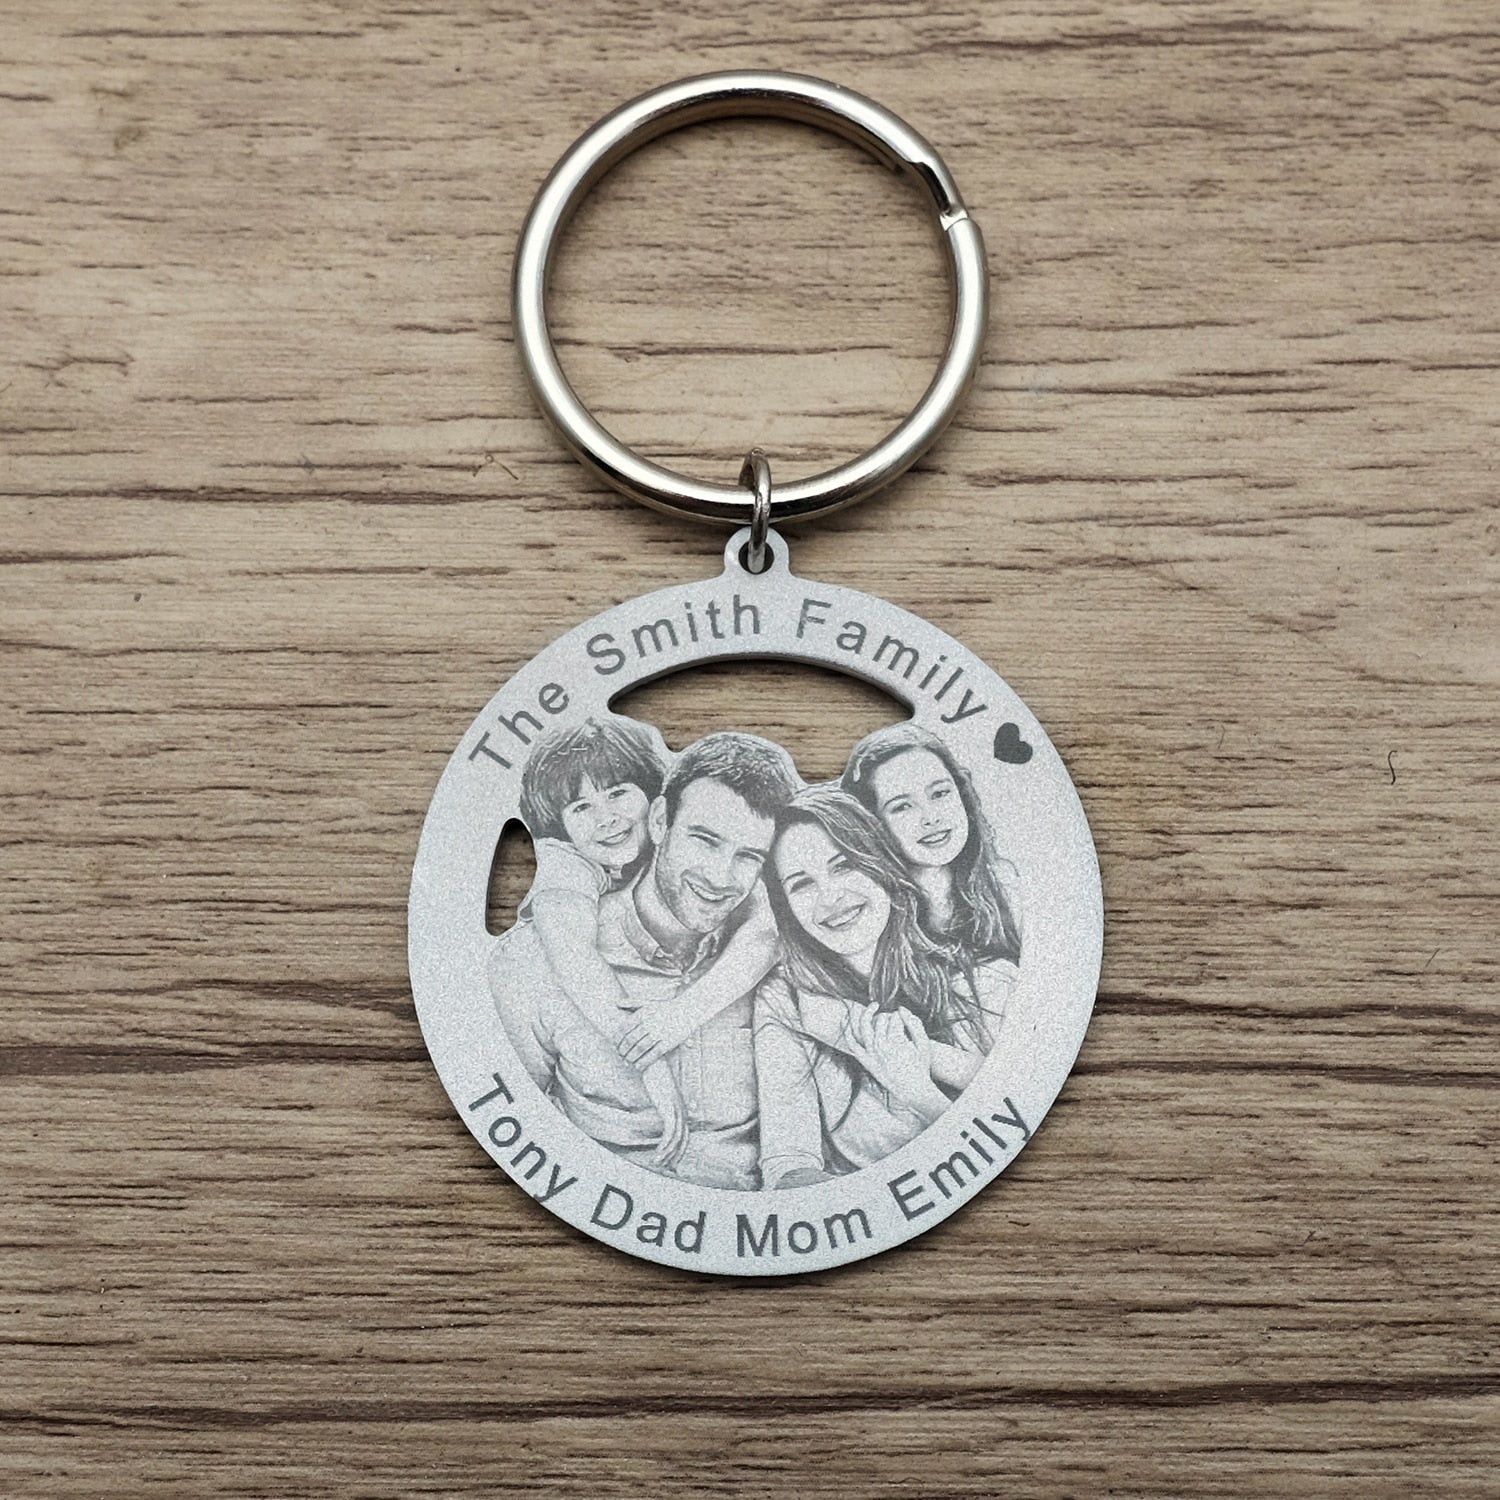 Personalized Engraved Photo Keychain - Premium keychain from Gift Me A Break - Just $14.99! Shop now at giftmeabreak